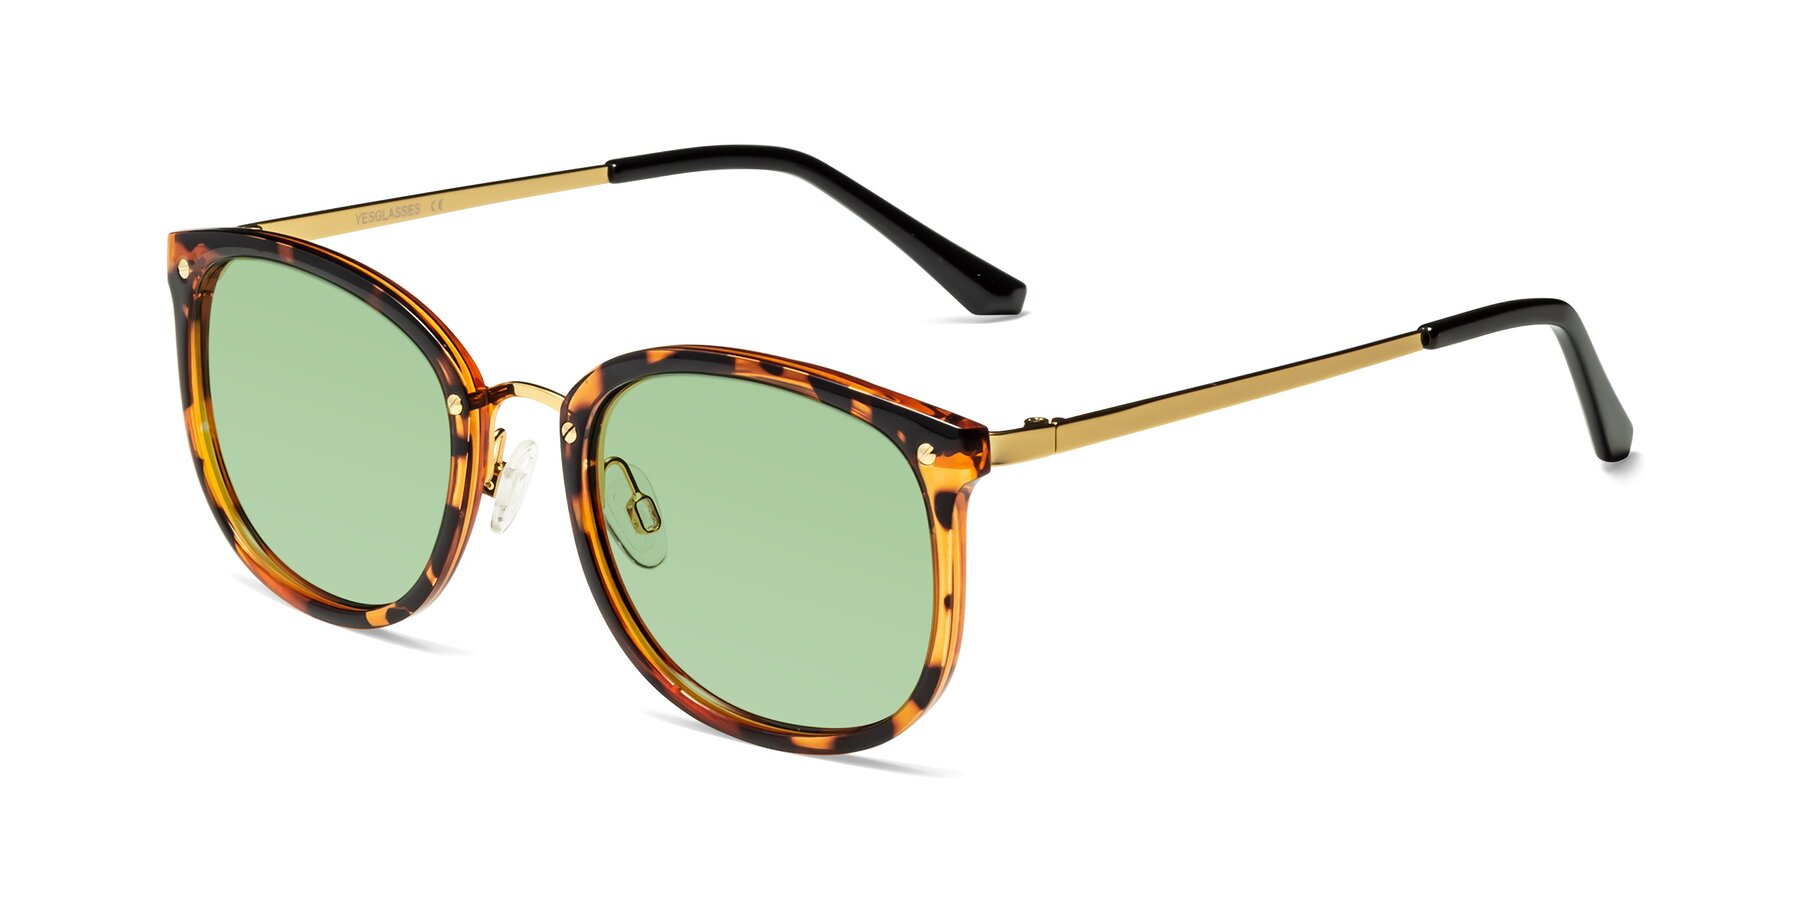 Angle of Timeless in Tortoise-Golden with Medium Green Tinted Lenses